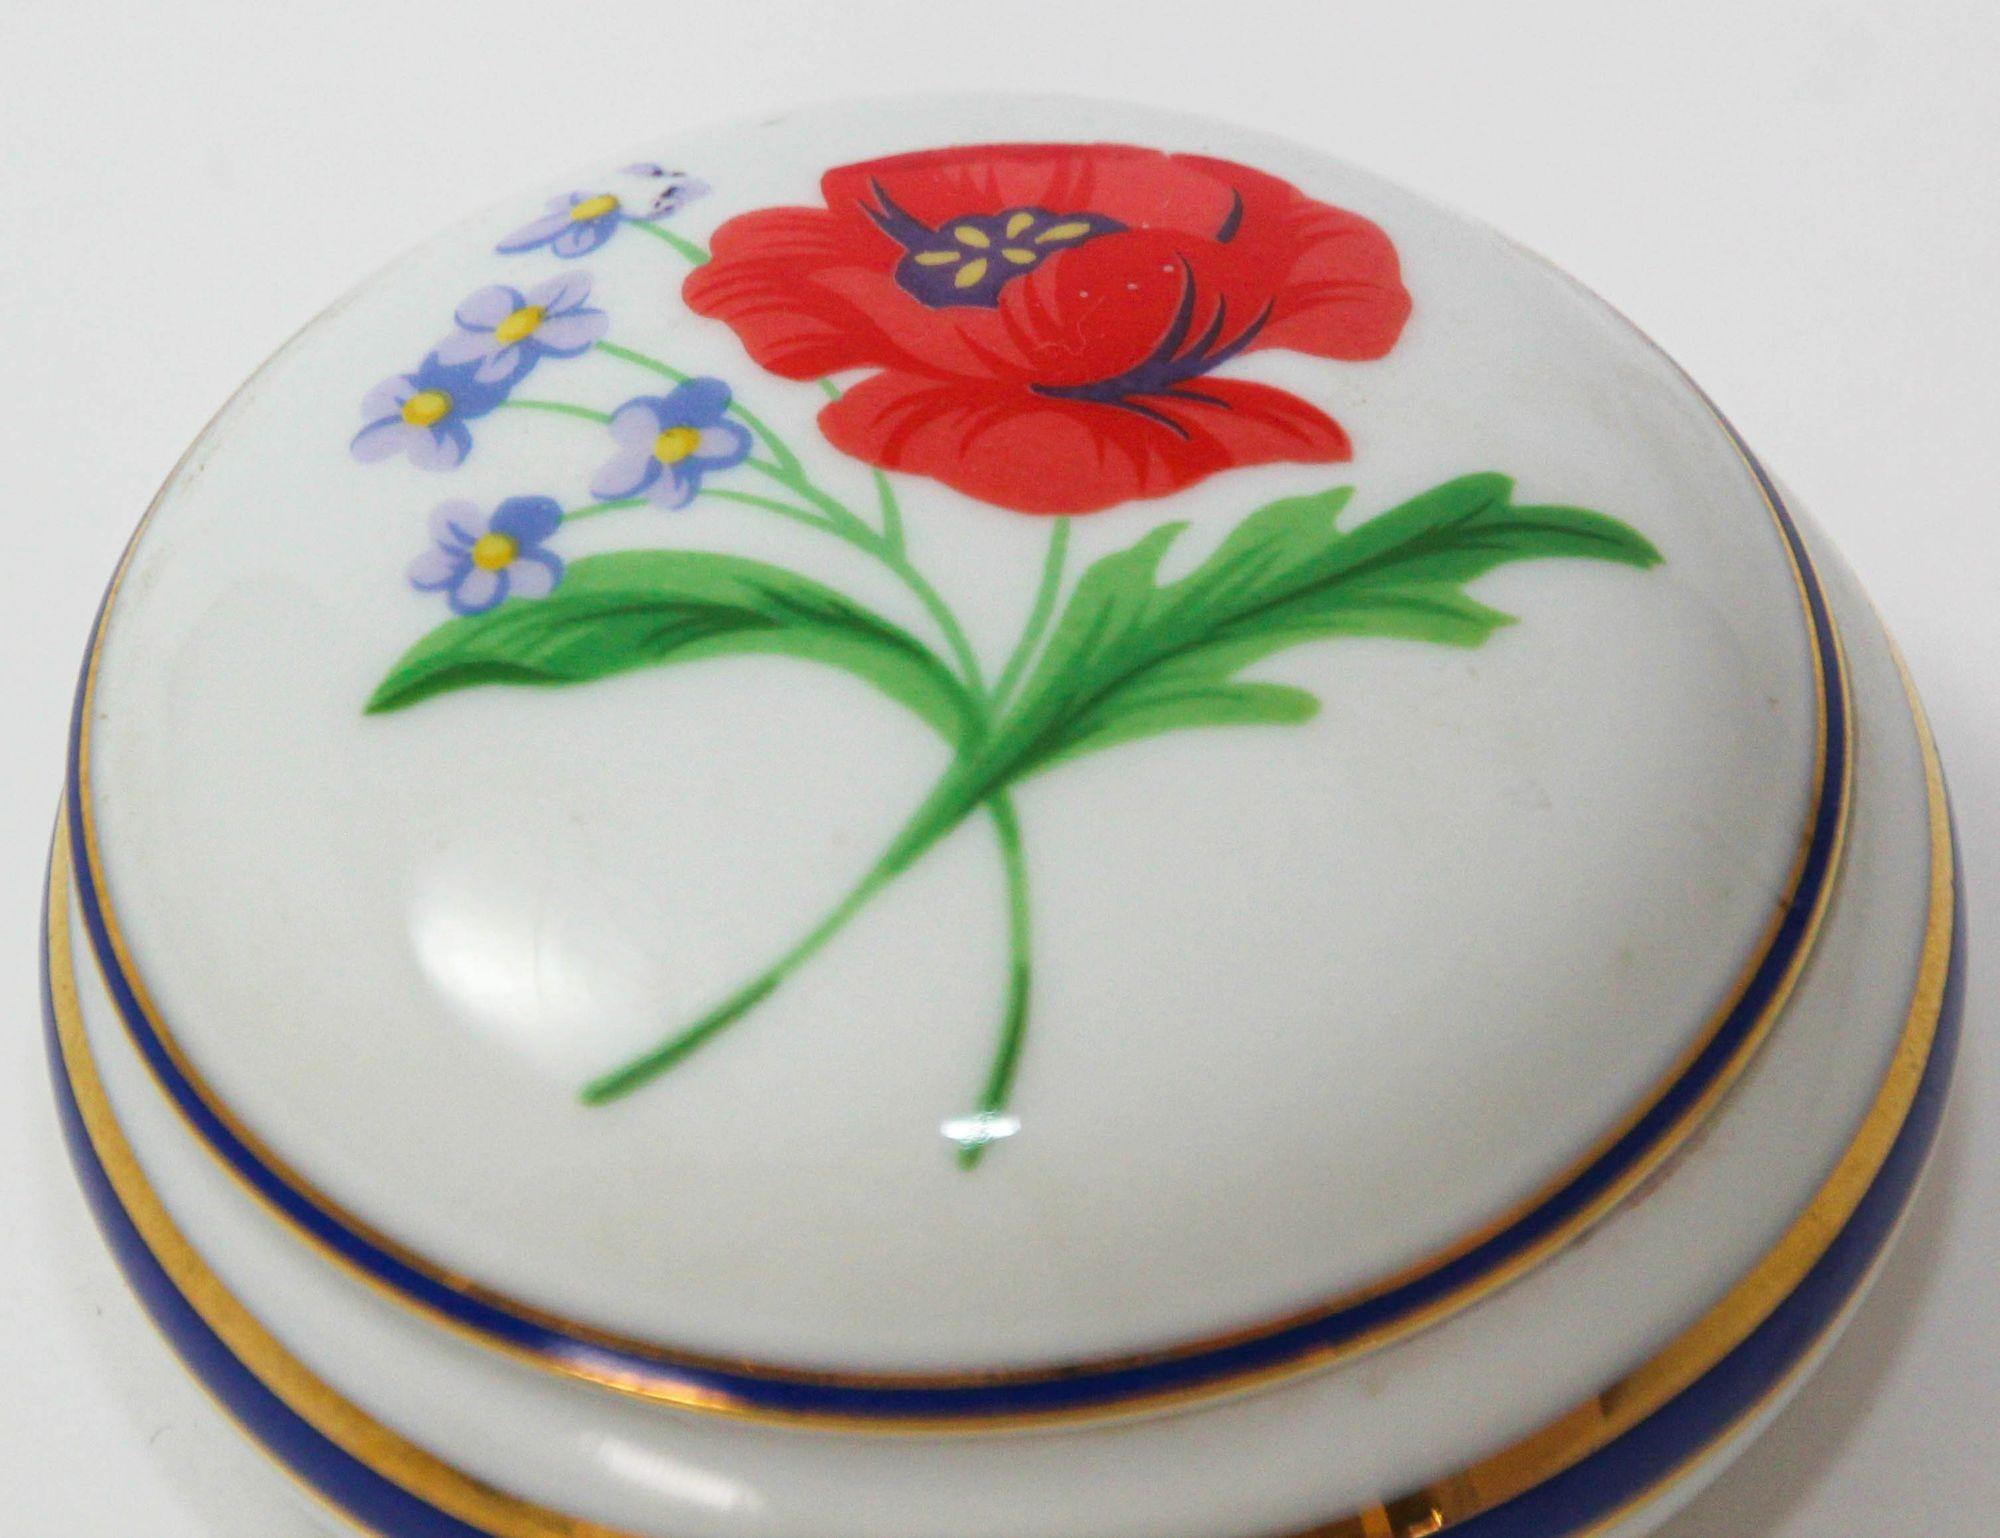 20th Century Tiffany & Co. Limoges France American Garden Round Porcelain Collectible Box